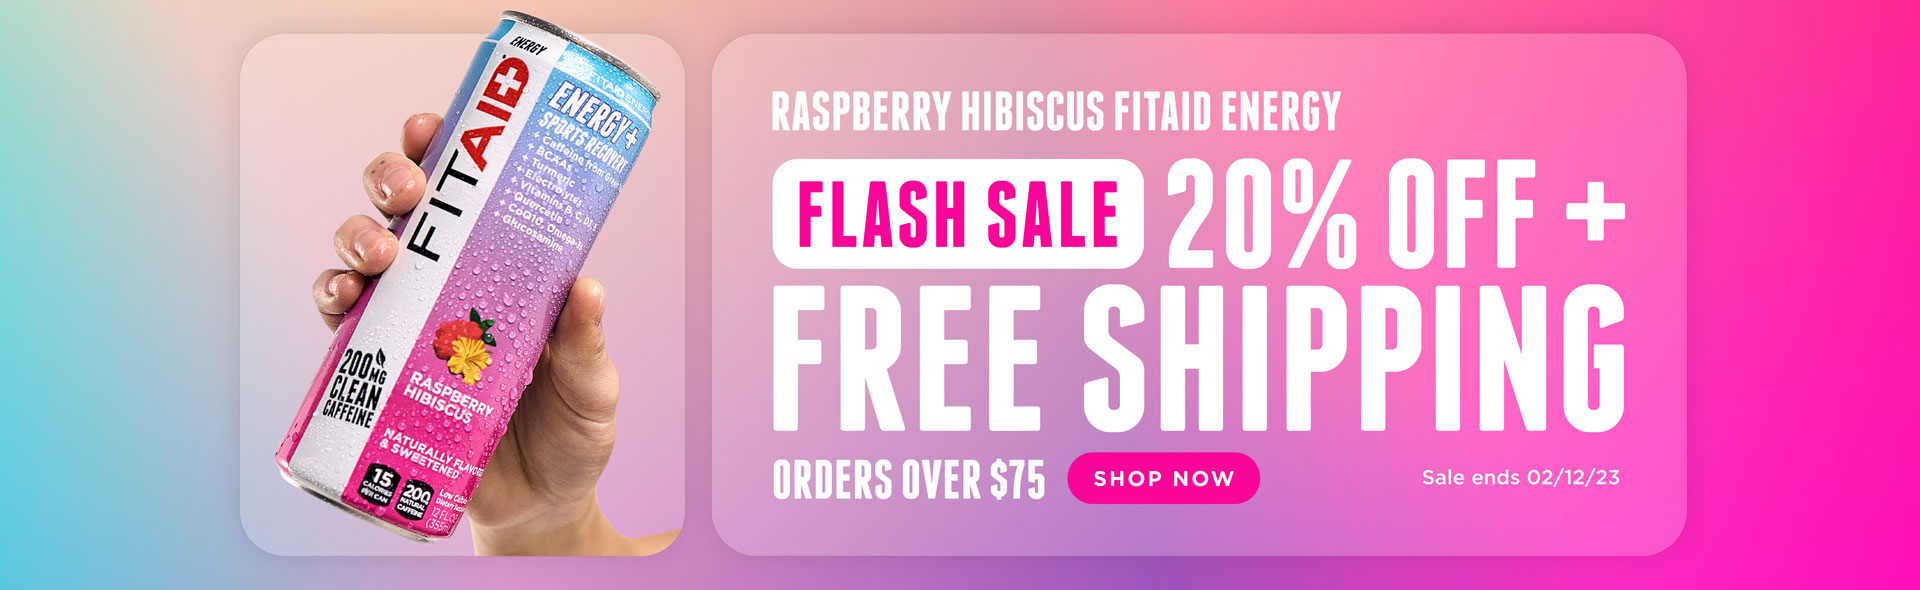 RASPBERRY HIBISCUS FITAID ENERGY FLASHSALE 20% OFF + FREE SHIPPING ORDER OVER $75 SHOP NOW SALE ENDS 02/12/23